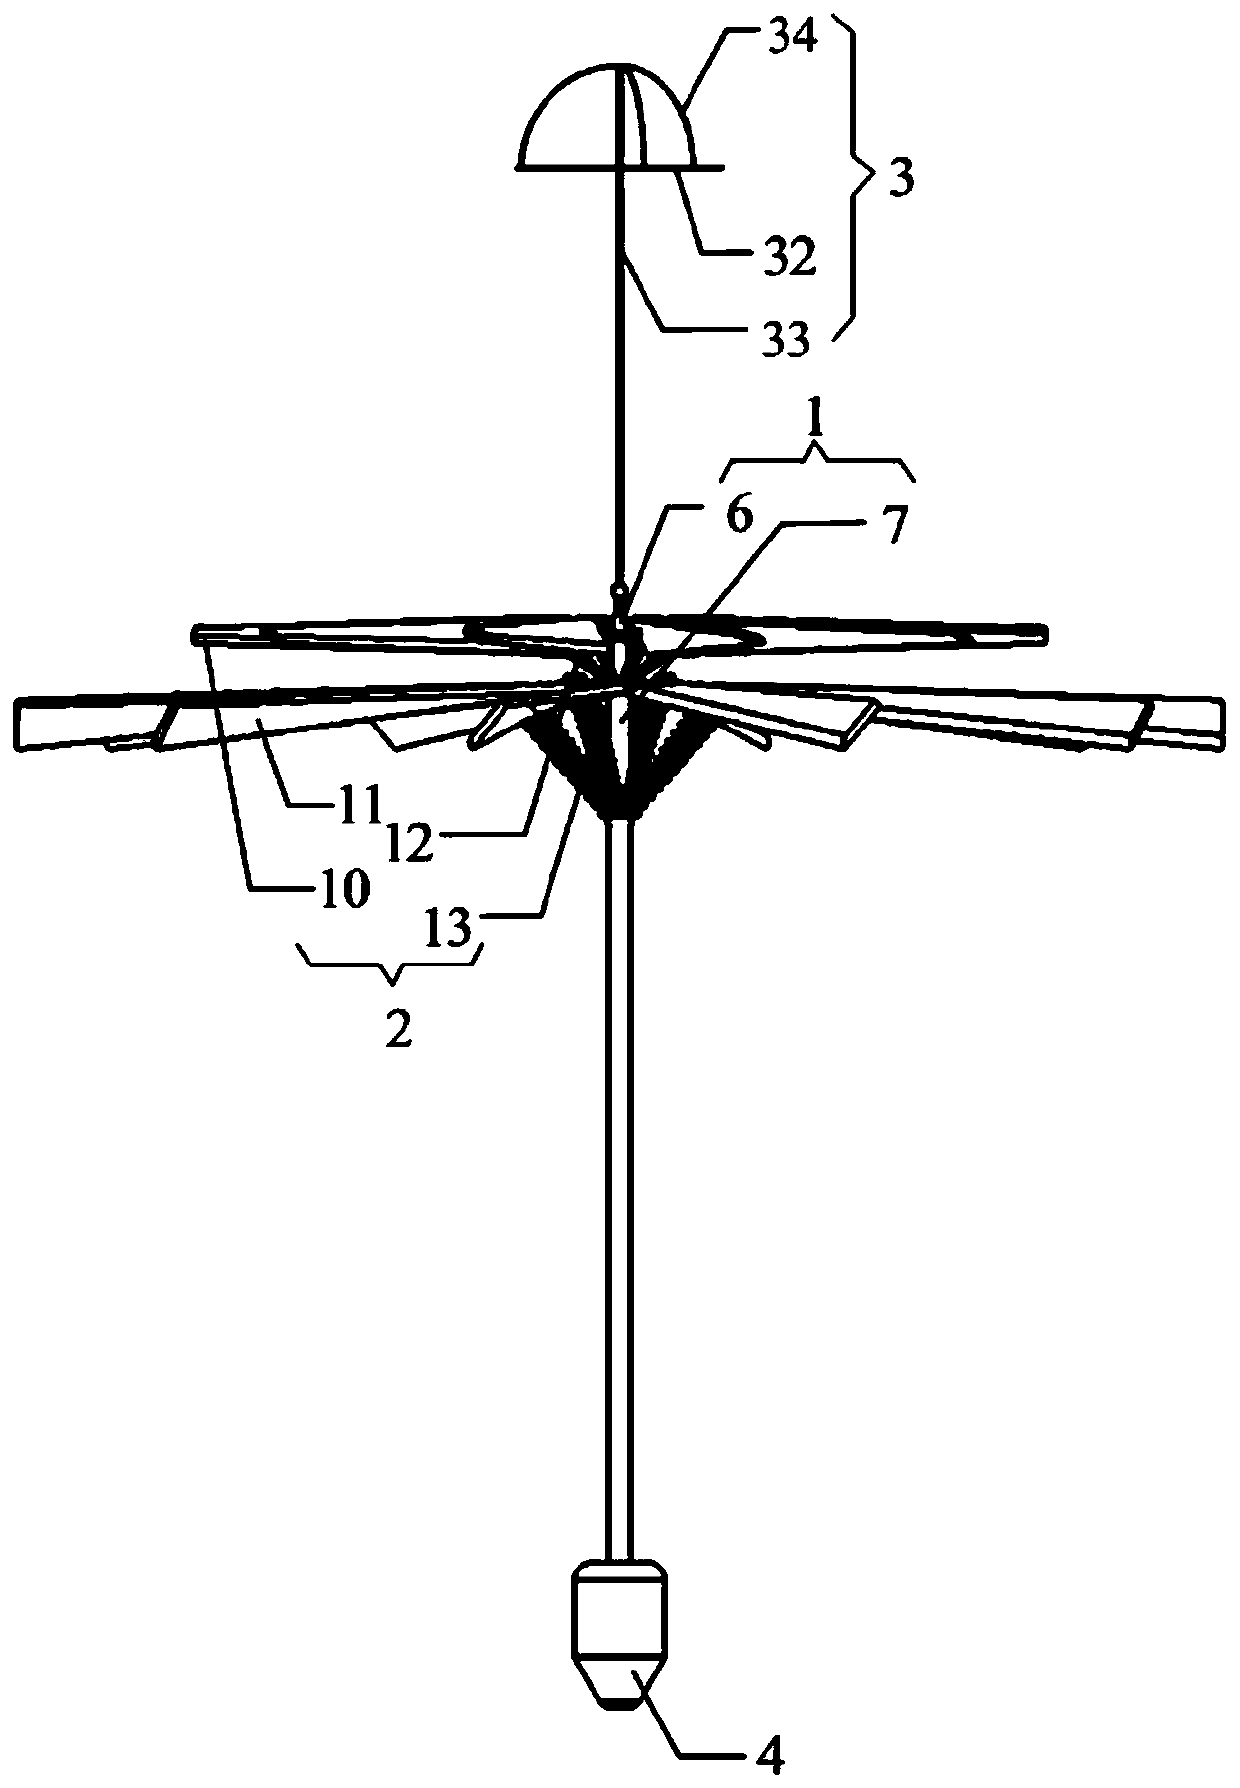 Downward-throwing type sonde with dandelion-like structure